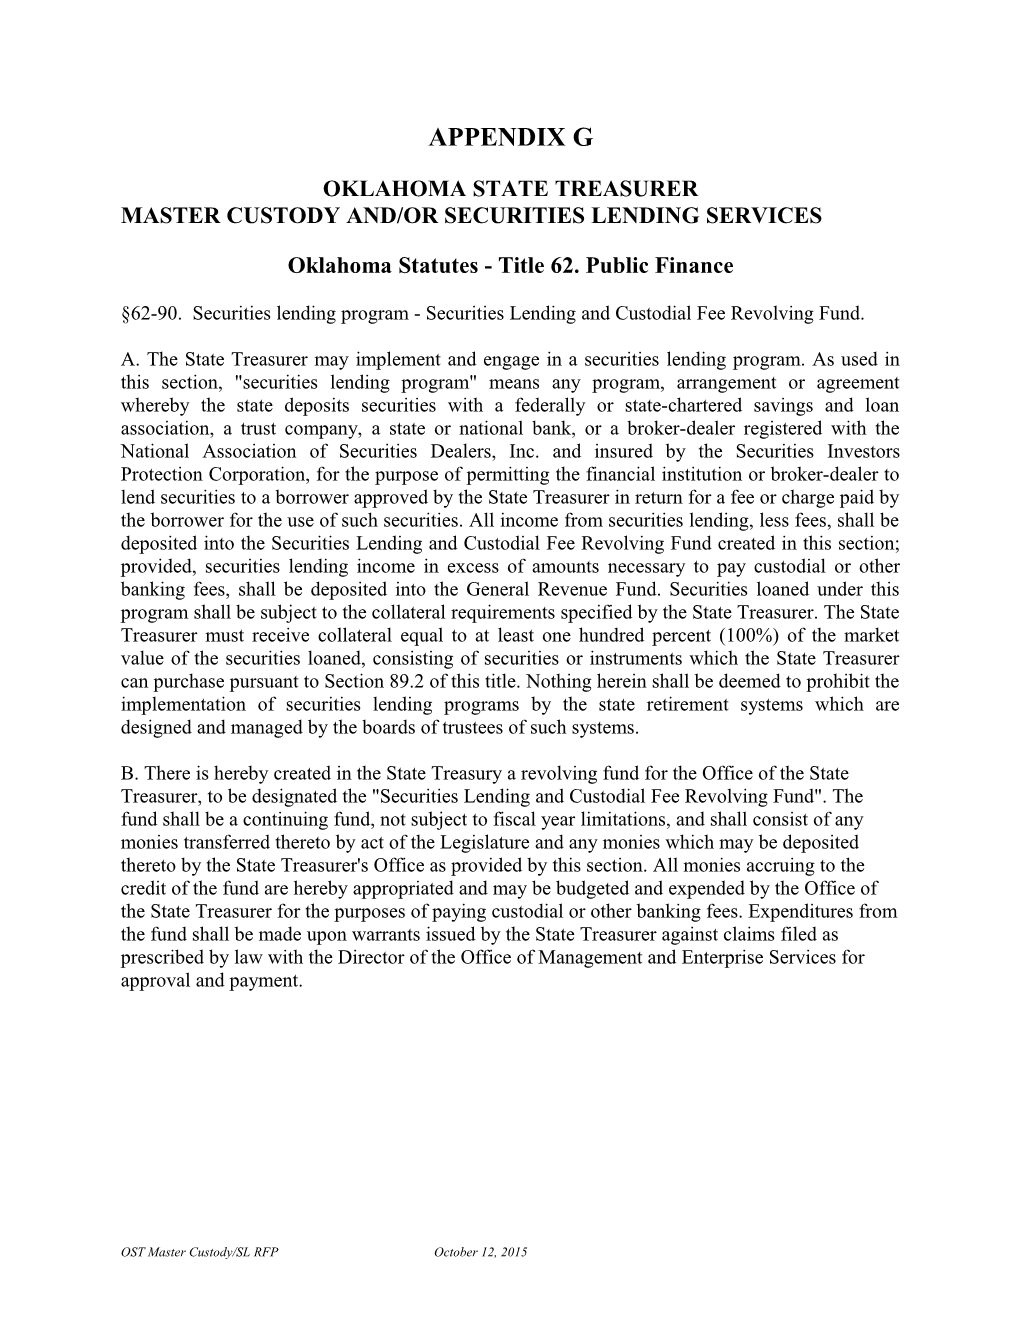 Master Custody And/Or Securities Lending Services